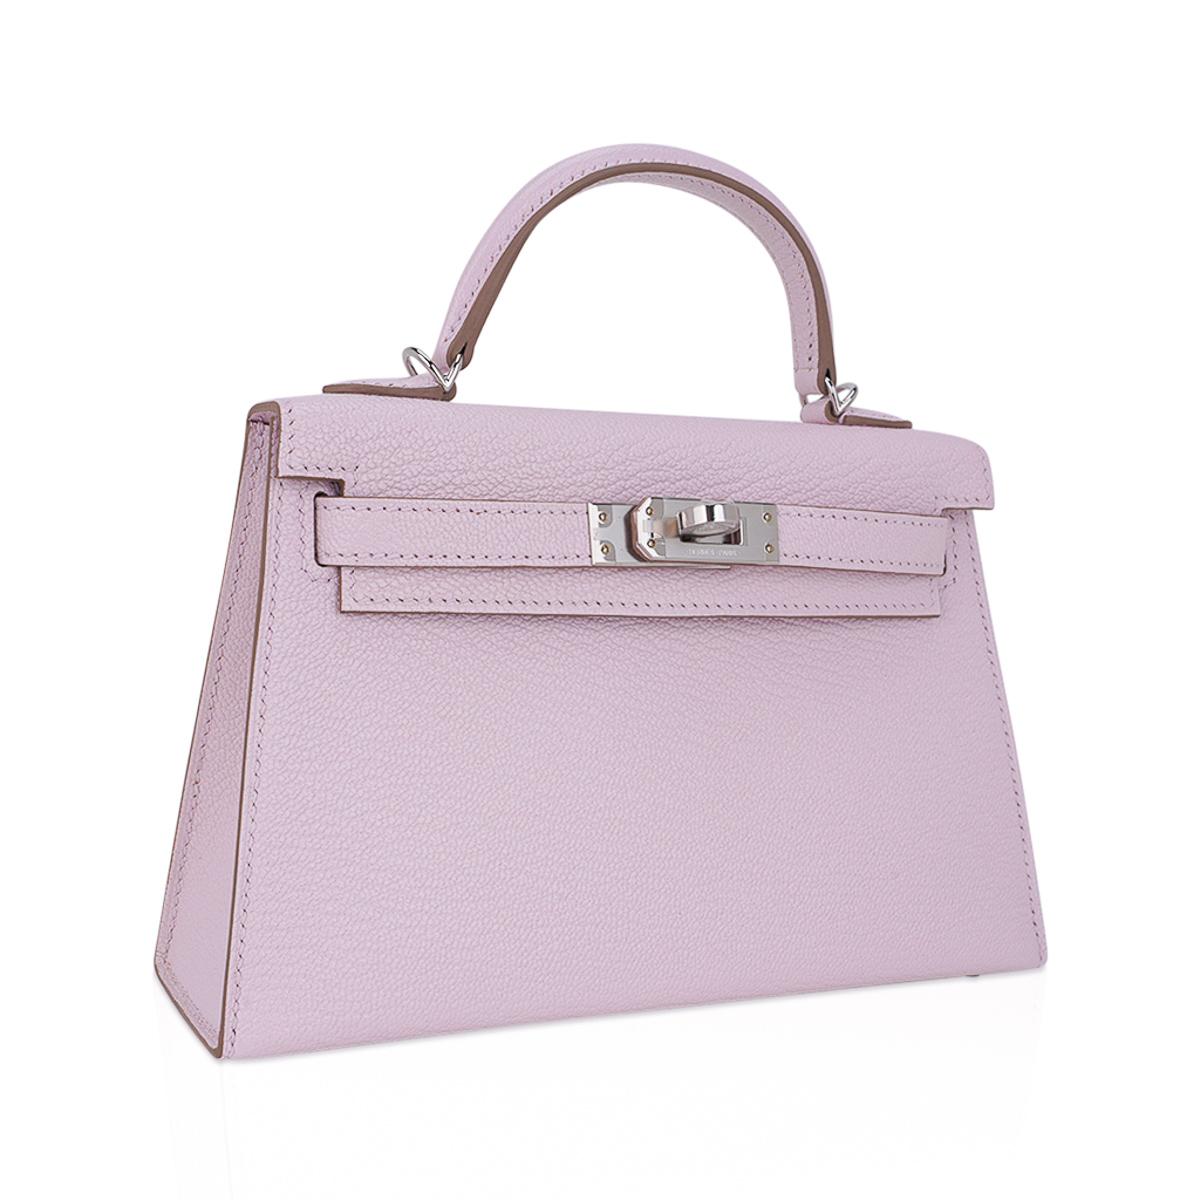 Mightychic offers an Hermes Kelly 20 Mini Sellier bag featured in Mauve Pale.
This exquisite hint of colour is neutral and perfect for year round wear.
Chevre leather has a natural exotic grain, and saturates colour to it bring out its glory.
Crisp